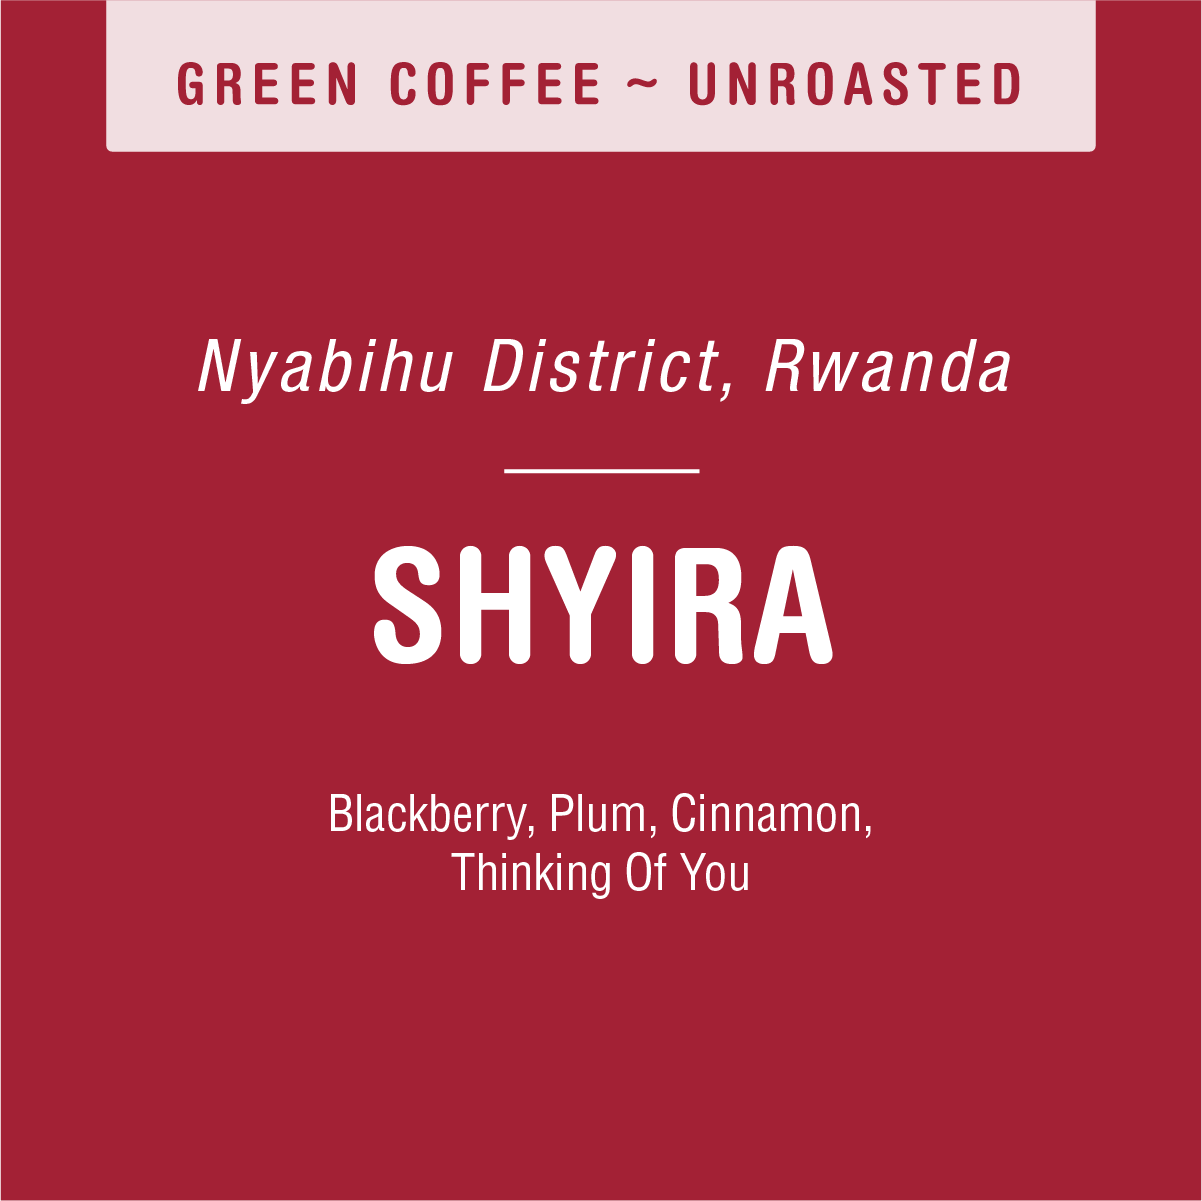 Label design for Rwandan coffee from Nyabihu district, specifically the Shyira (Green) washing station, listing flavors of blackberry, plum, and cinnamon on a maroon background.